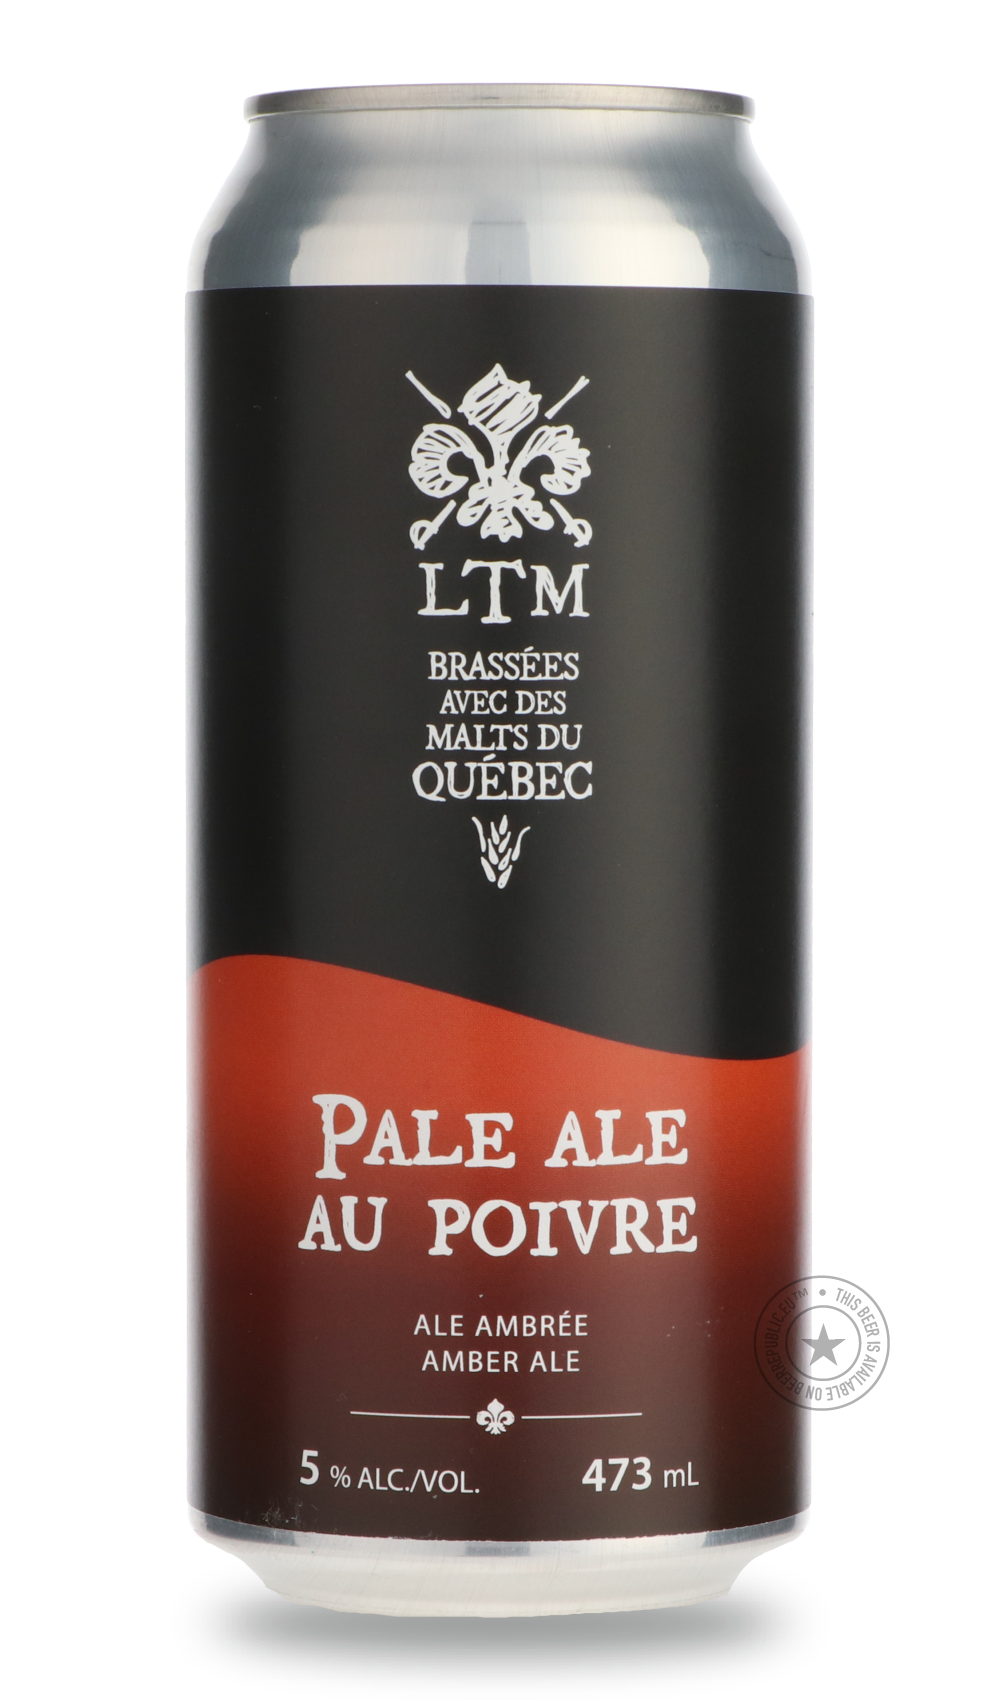 -Les Trois Mousquetaires- Pale Ale Au Poivre-Pale- Only @ Beer Republic - The best online beer store for American & Canadian craft beer - Buy beer online from the USA and Canada - Bier online kopen - Amerikaans bier kopen - Craft beer store - Craft beer kopen - Amerikanisch bier kaufen - Bier online kaufen - Acheter biere online - IPA - Stout - Porter - New England IPA - Hazy IPA - Imperial Stout - Barrel Aged - Barrel Aged Imperial Stout - Brown - Dark beer - Blond - Blonde - Pilsner - Lager - Wheat - Weiz